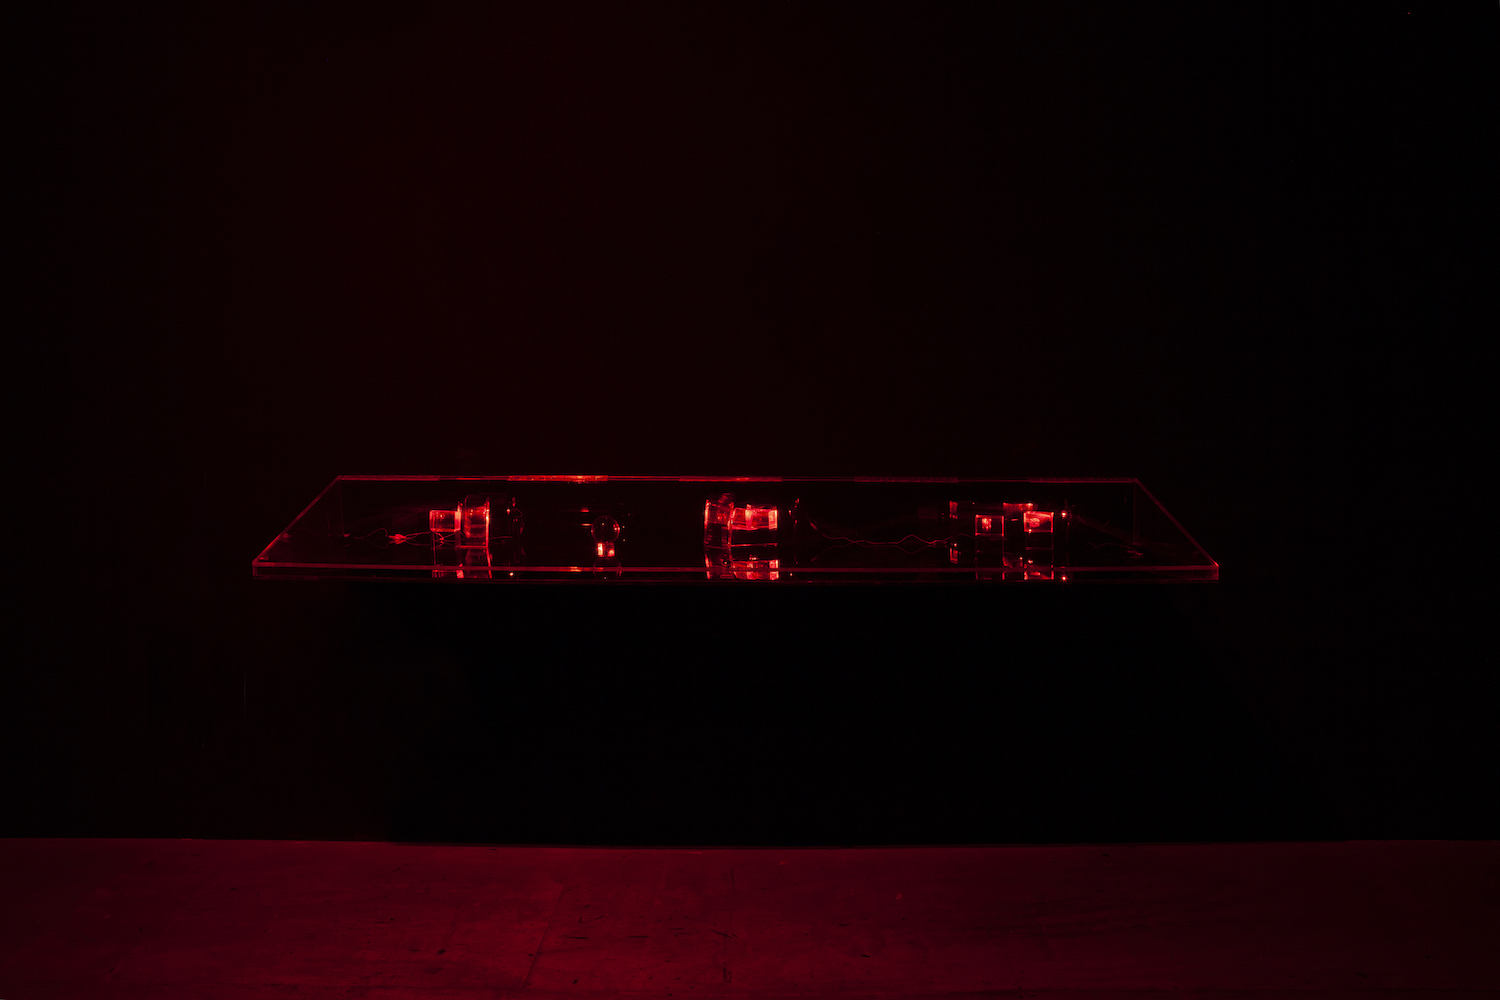 Constantina Zavitsanos, *Boxed Bet*, 2019. Transmission holograms, acrylic mounts, 5mW red laser. Installation view

[image description: A clear plexiglass display case is mounted on a black wall in a darkened space with wooden floor. Laser light glows from the display case. Its closed clear lid and sides slope down from back to front. Inside the case are three separate arrangements of holograms on dimensional clear acrylic mounts, as well as a single glass sphere, each lit by a red laser.]